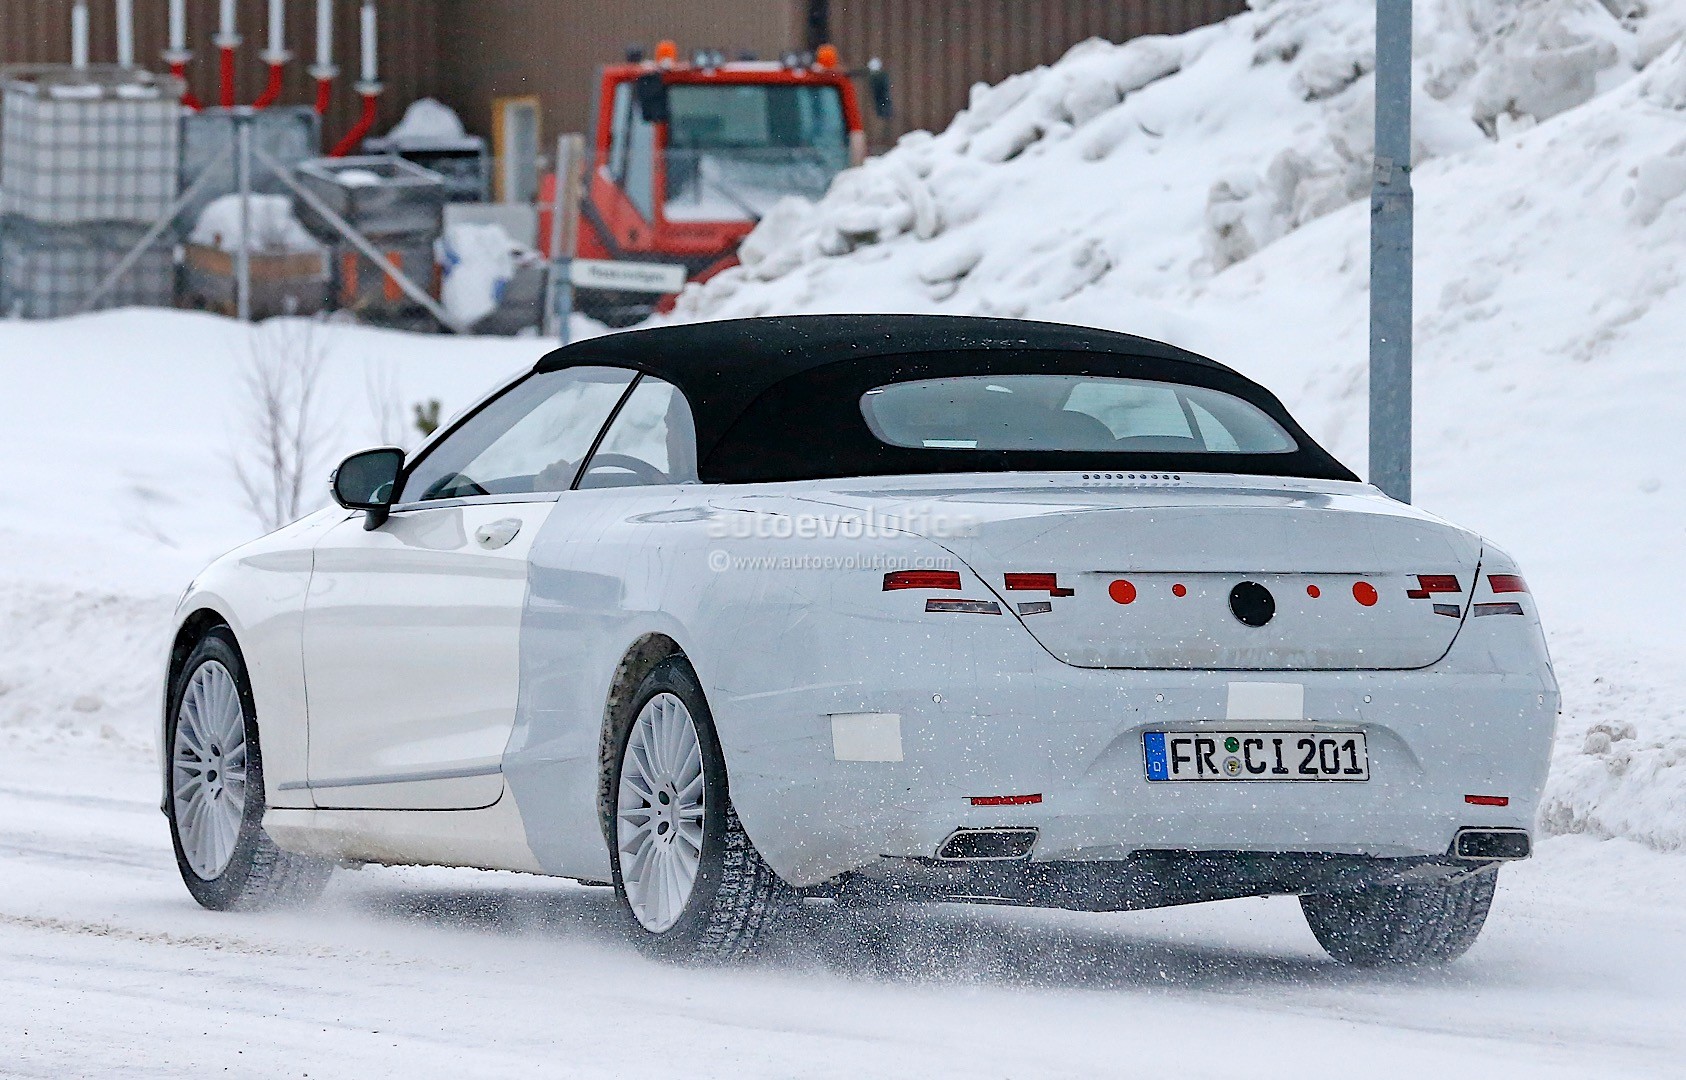 spyshots-mercedes-benz-s-class-cabriolet-a217-spotted-cold-weather-testing_12